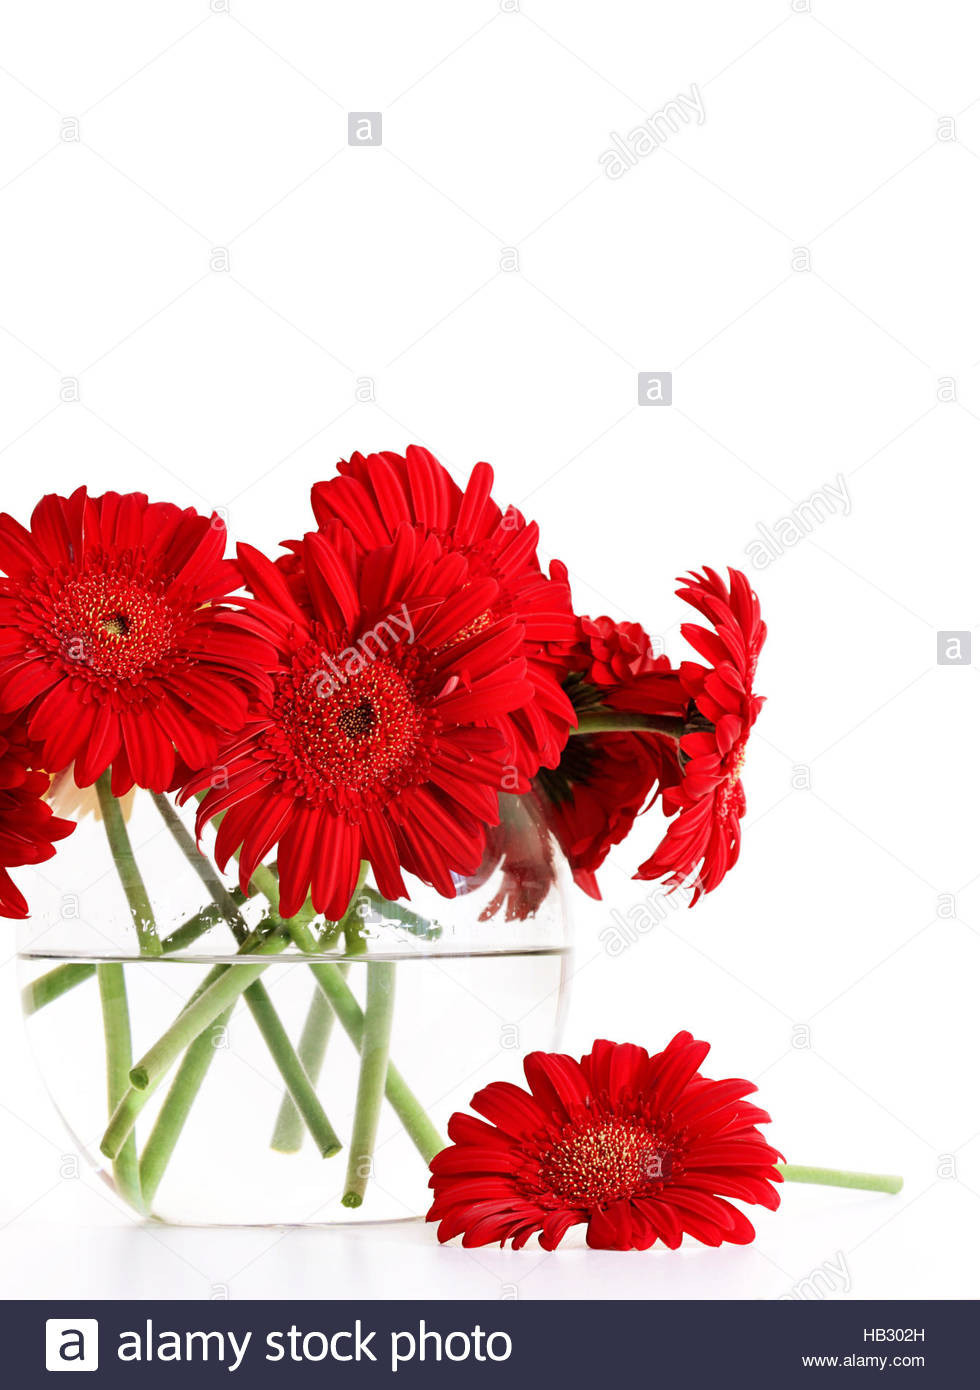 24 attractive Waterford Rose Bowl Vase 2024 free download waterford rose bowl vase of pics of red crystal vase vases artificial plants collection within red crystal vase photograph closeup od red gerber daisies in glass vase stock of pics of